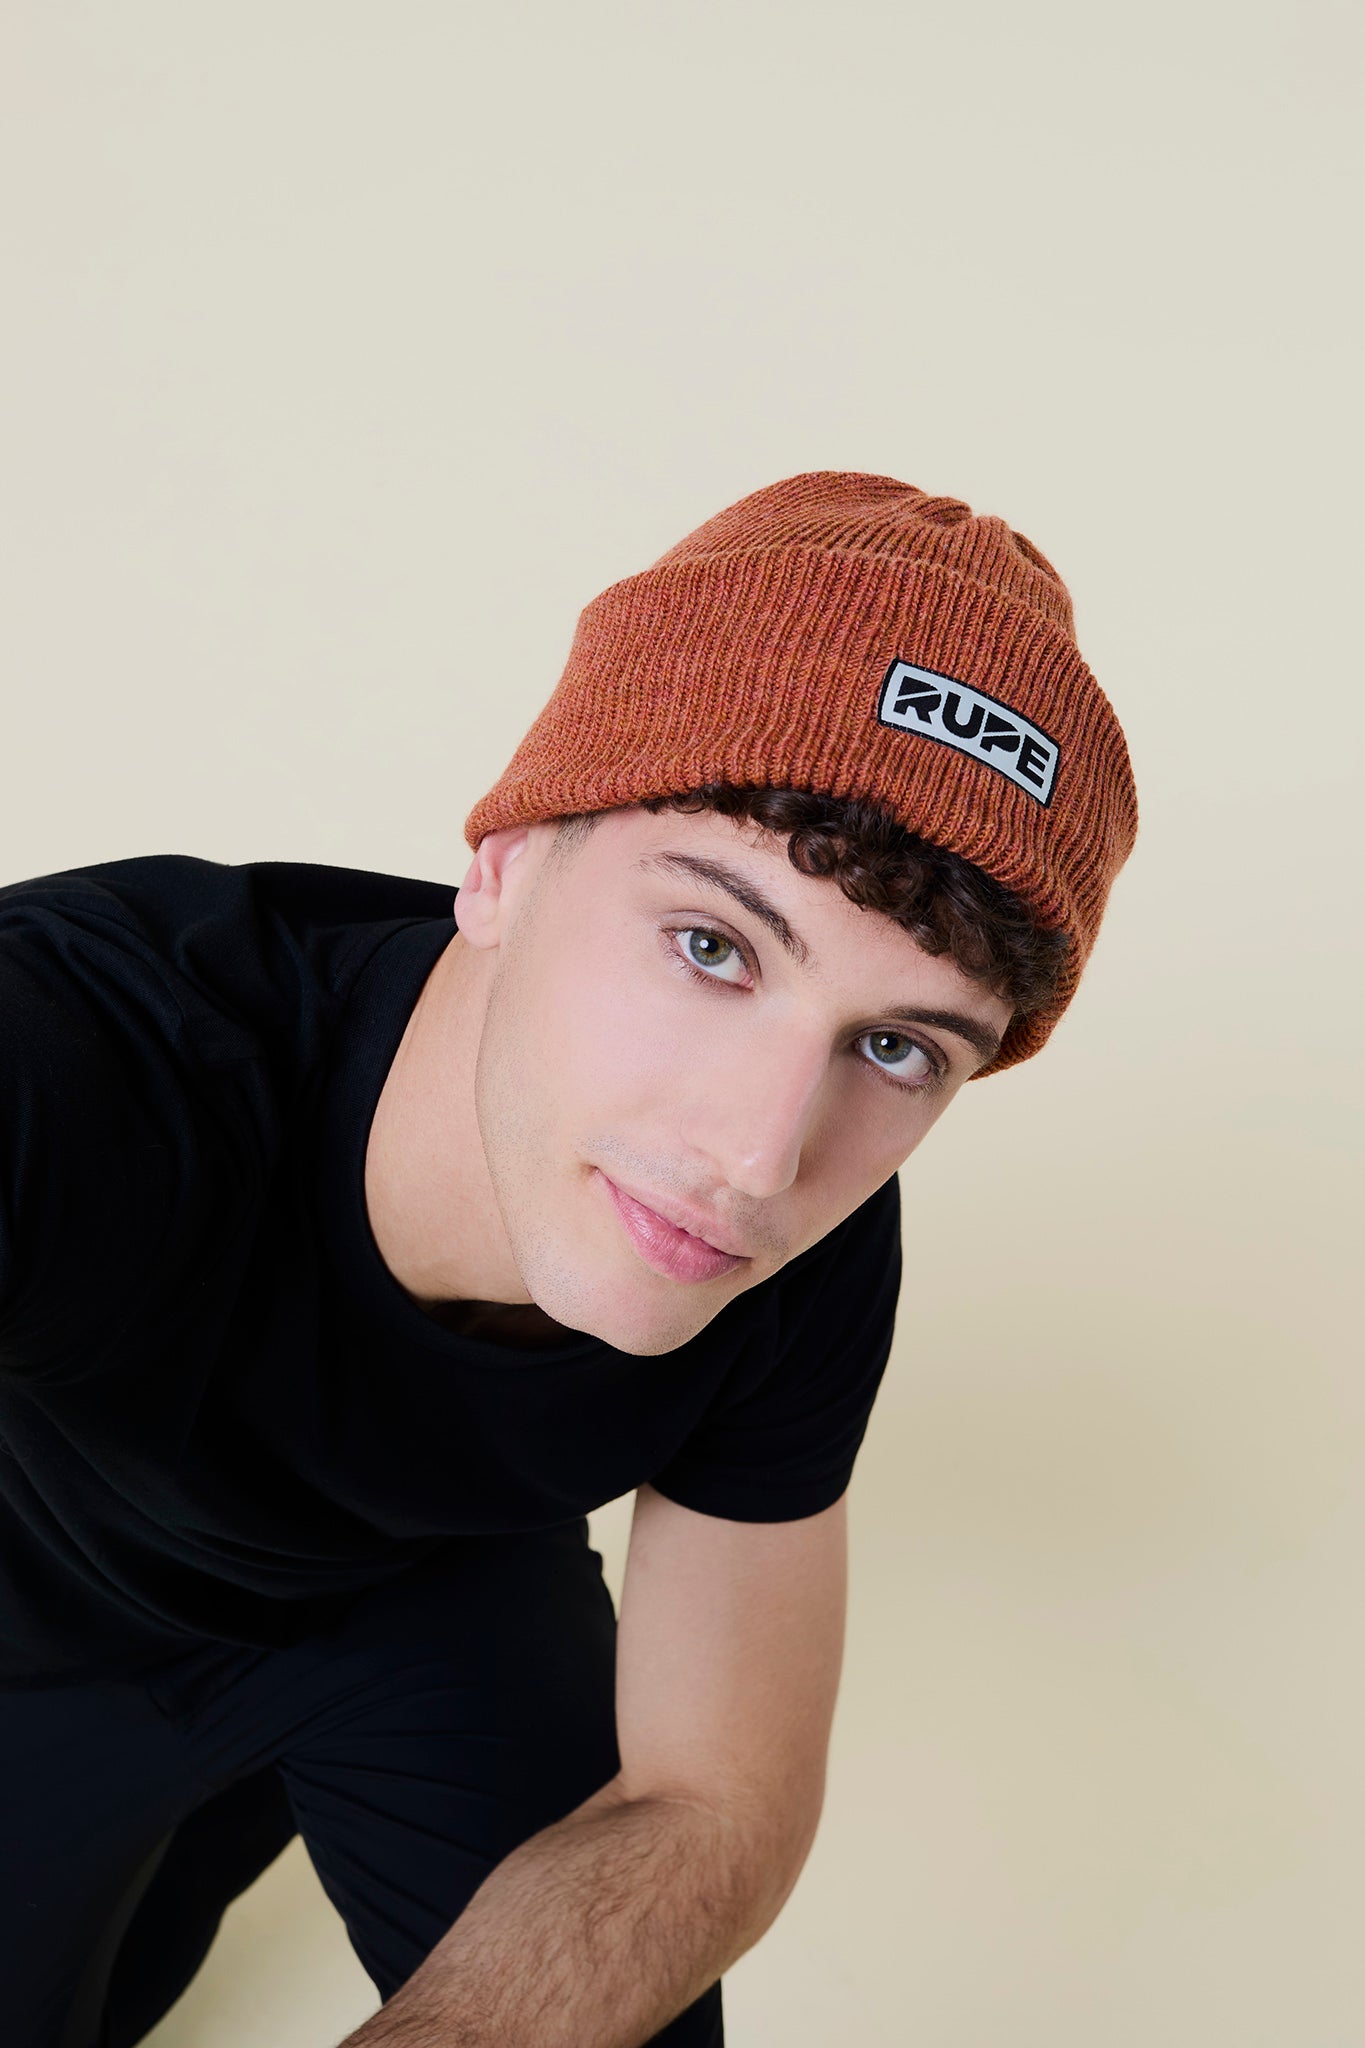 Sheep Rupe Beanie Hat by Brazz - Copper